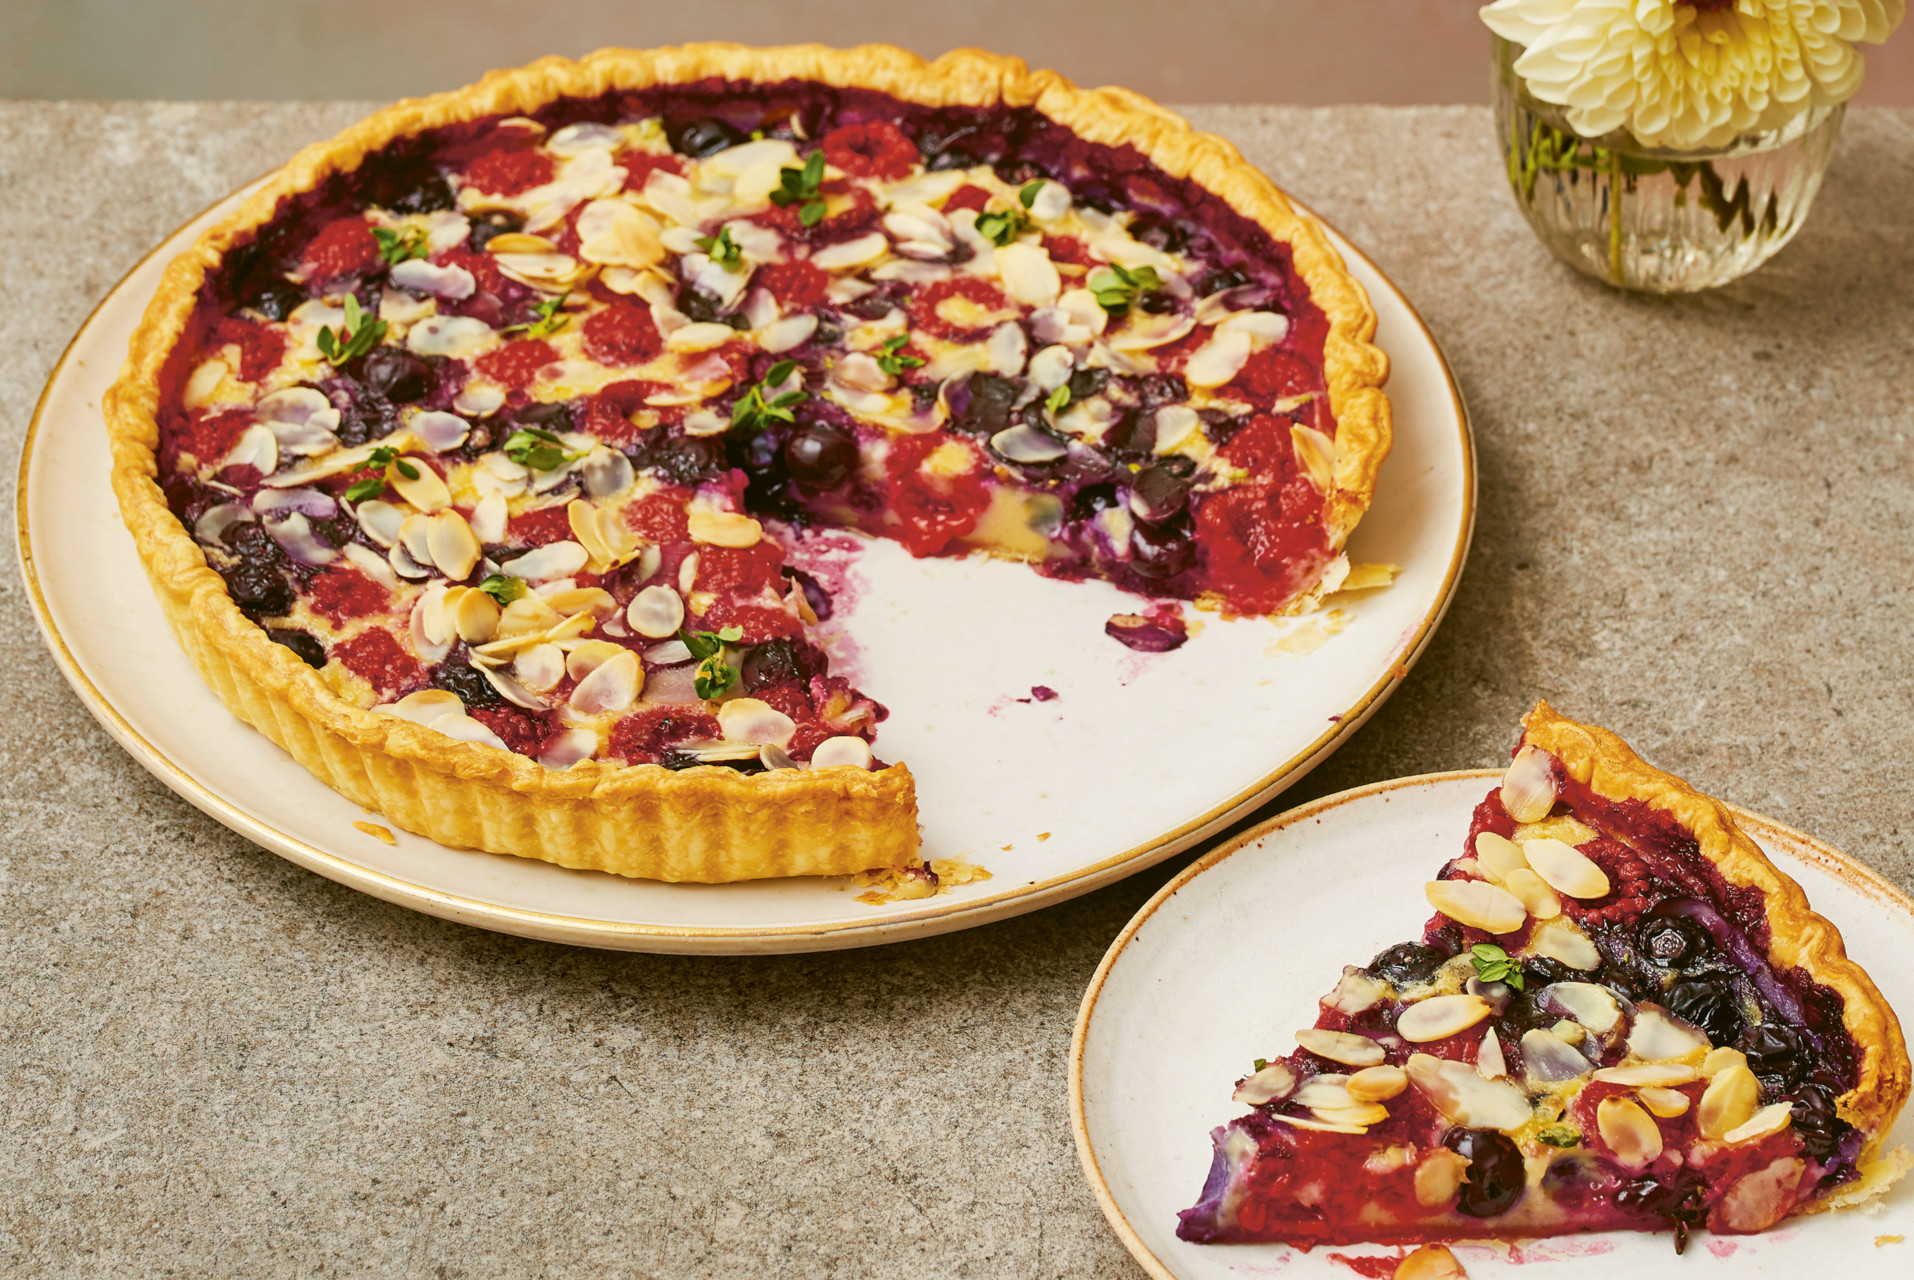 Candice Brown's Raspberry, Blueberry and Almond Clafoutart